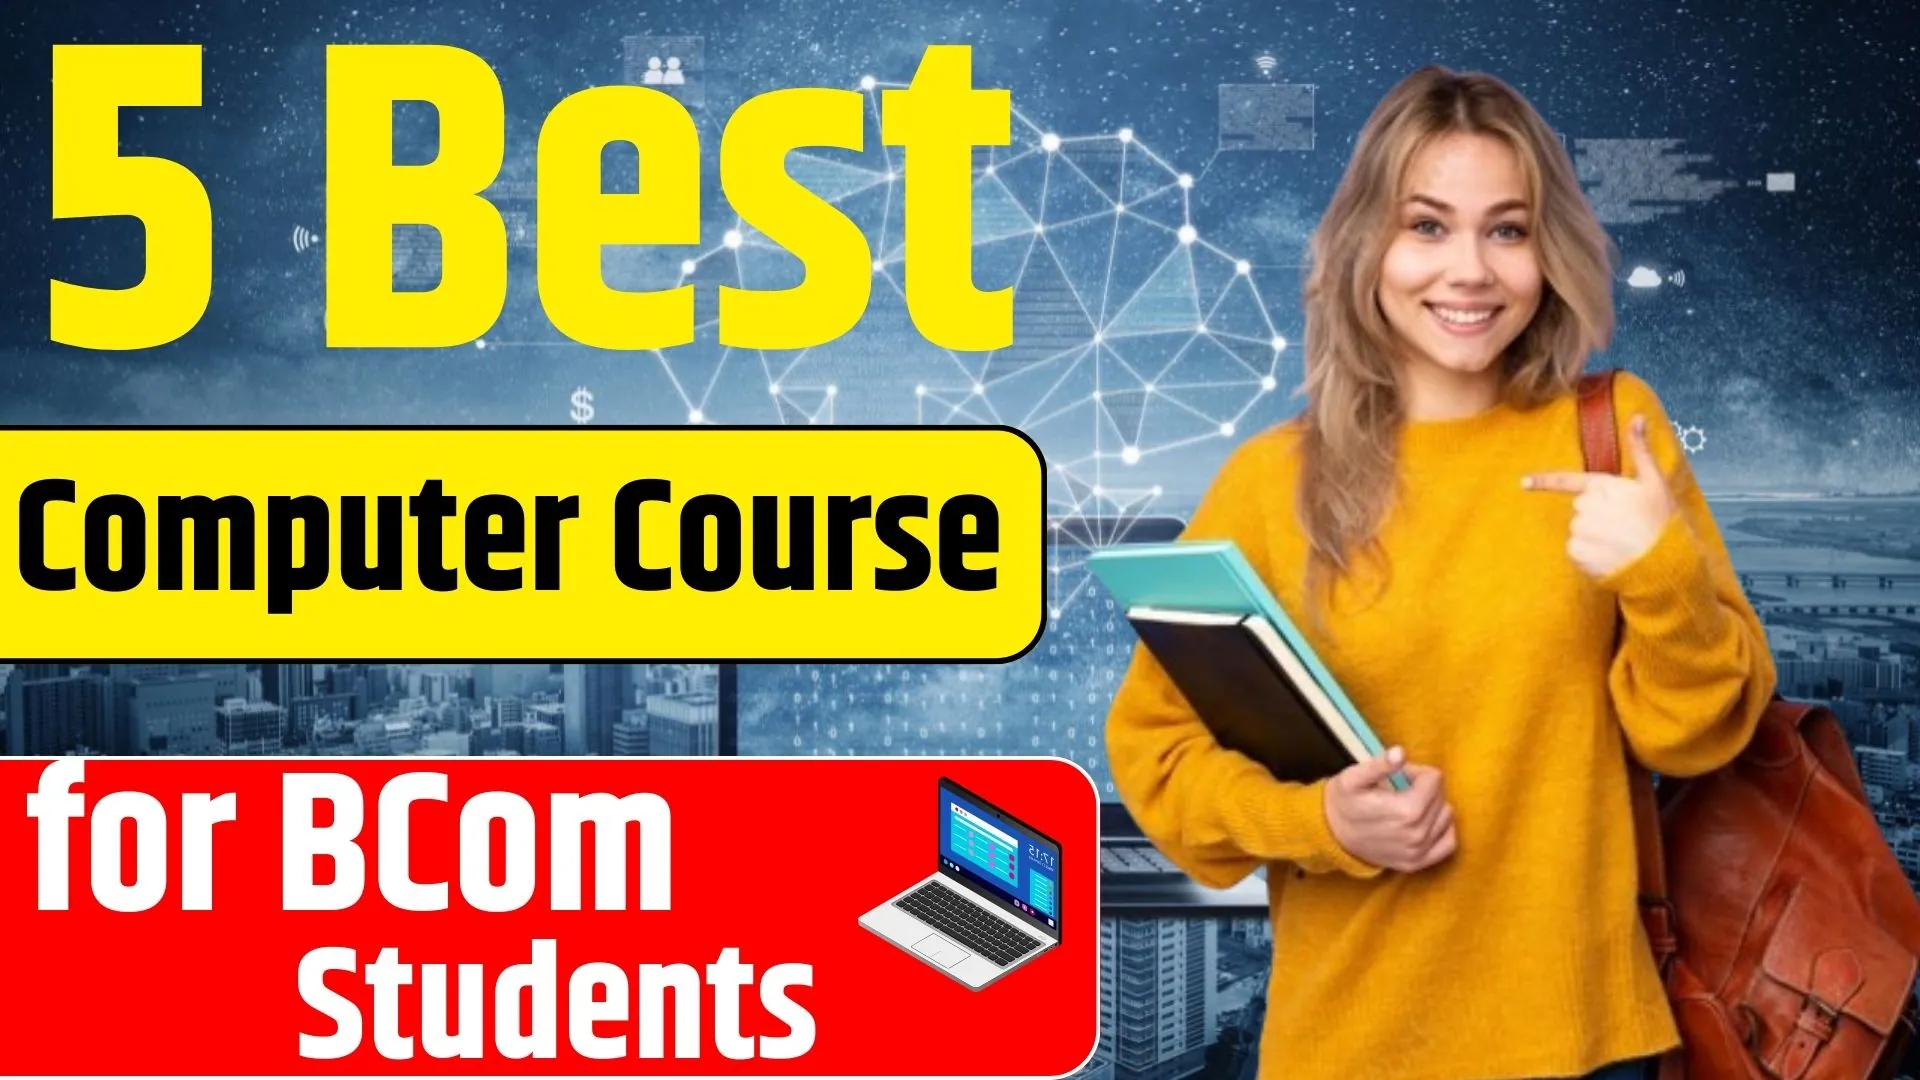 5 Best Computer Course for BCom Students